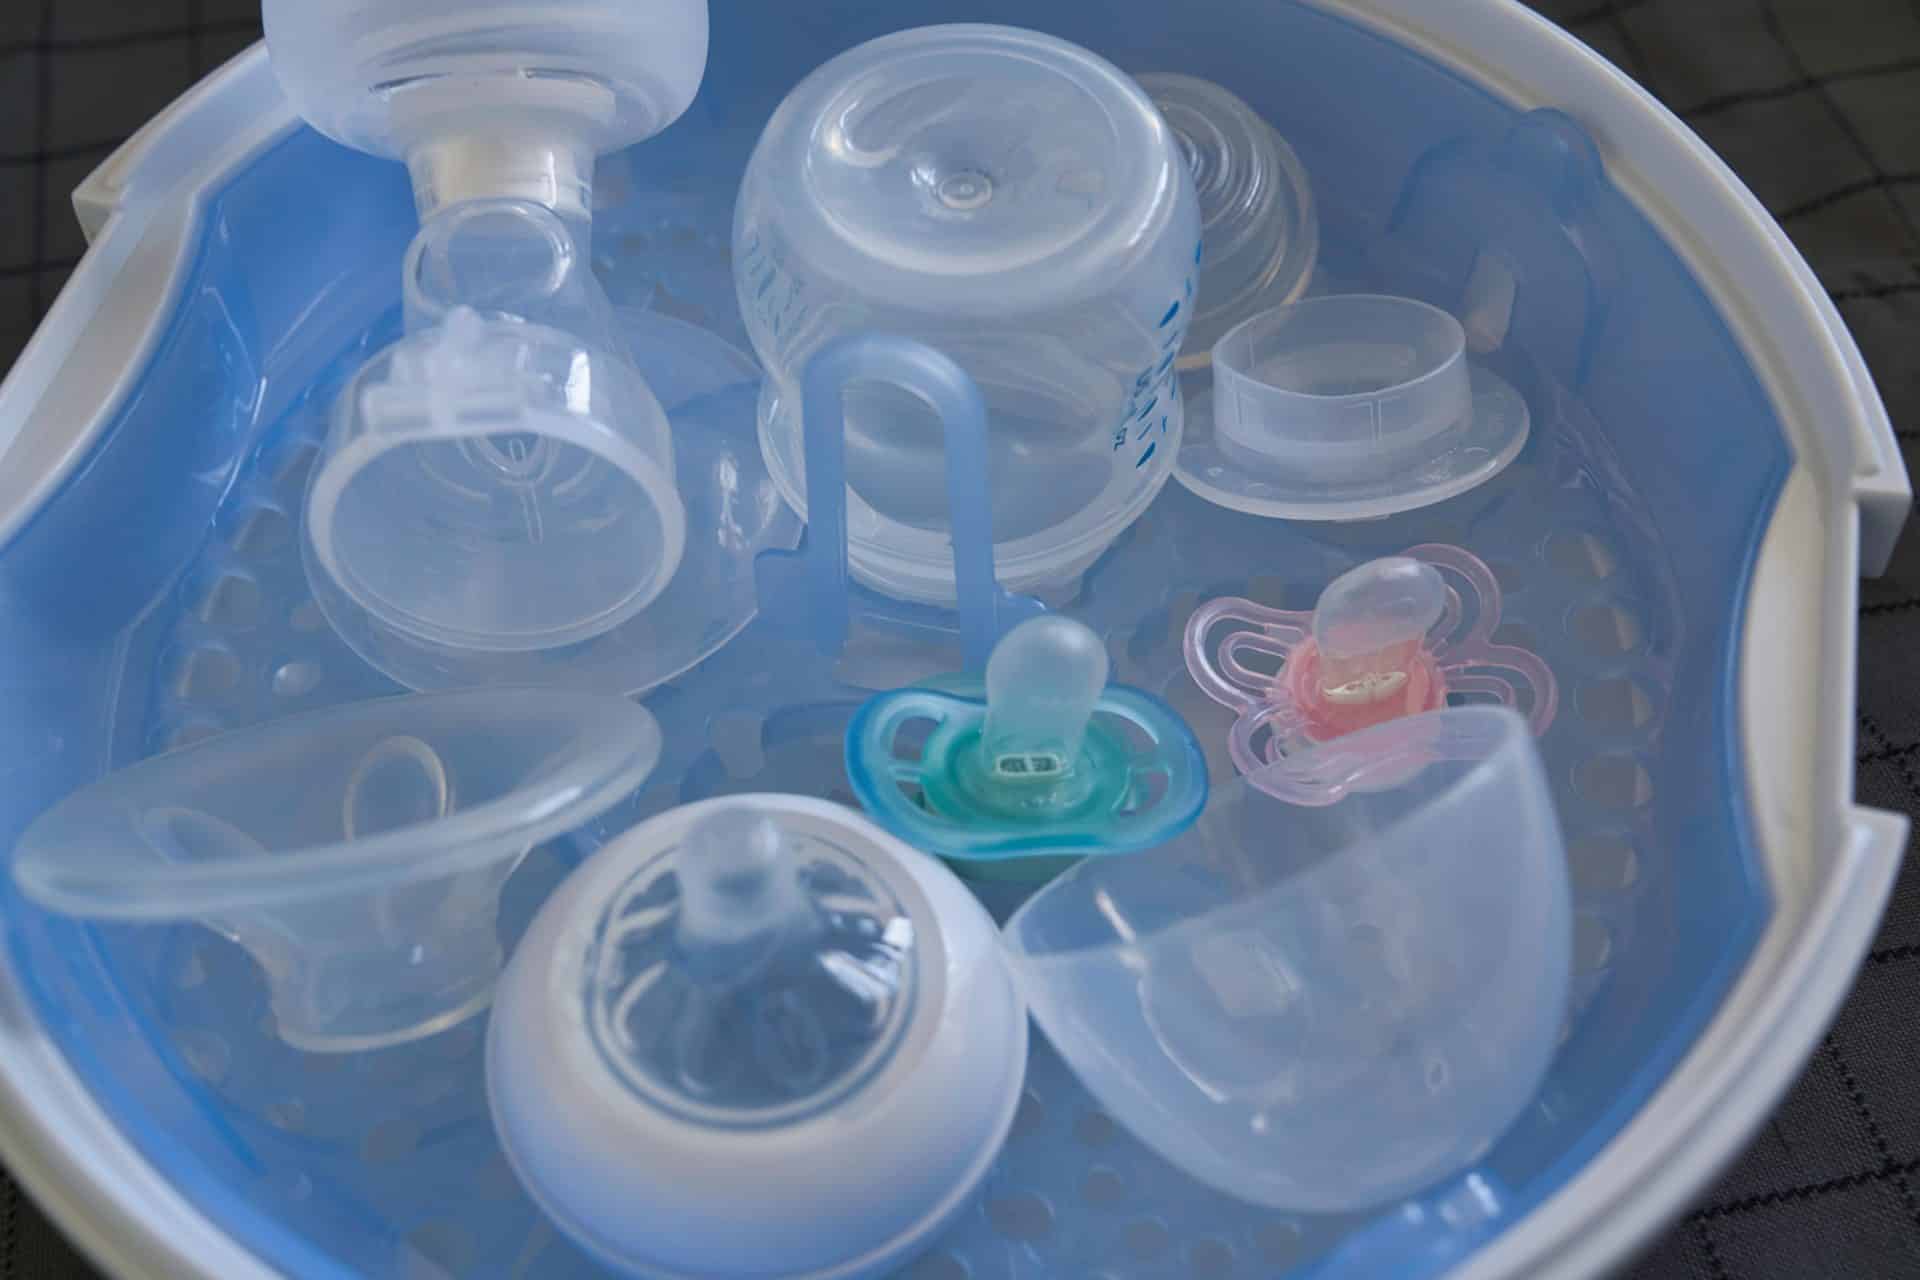 Today's Hint: How to Make Baby Bottle Drying Racks Worth the Money